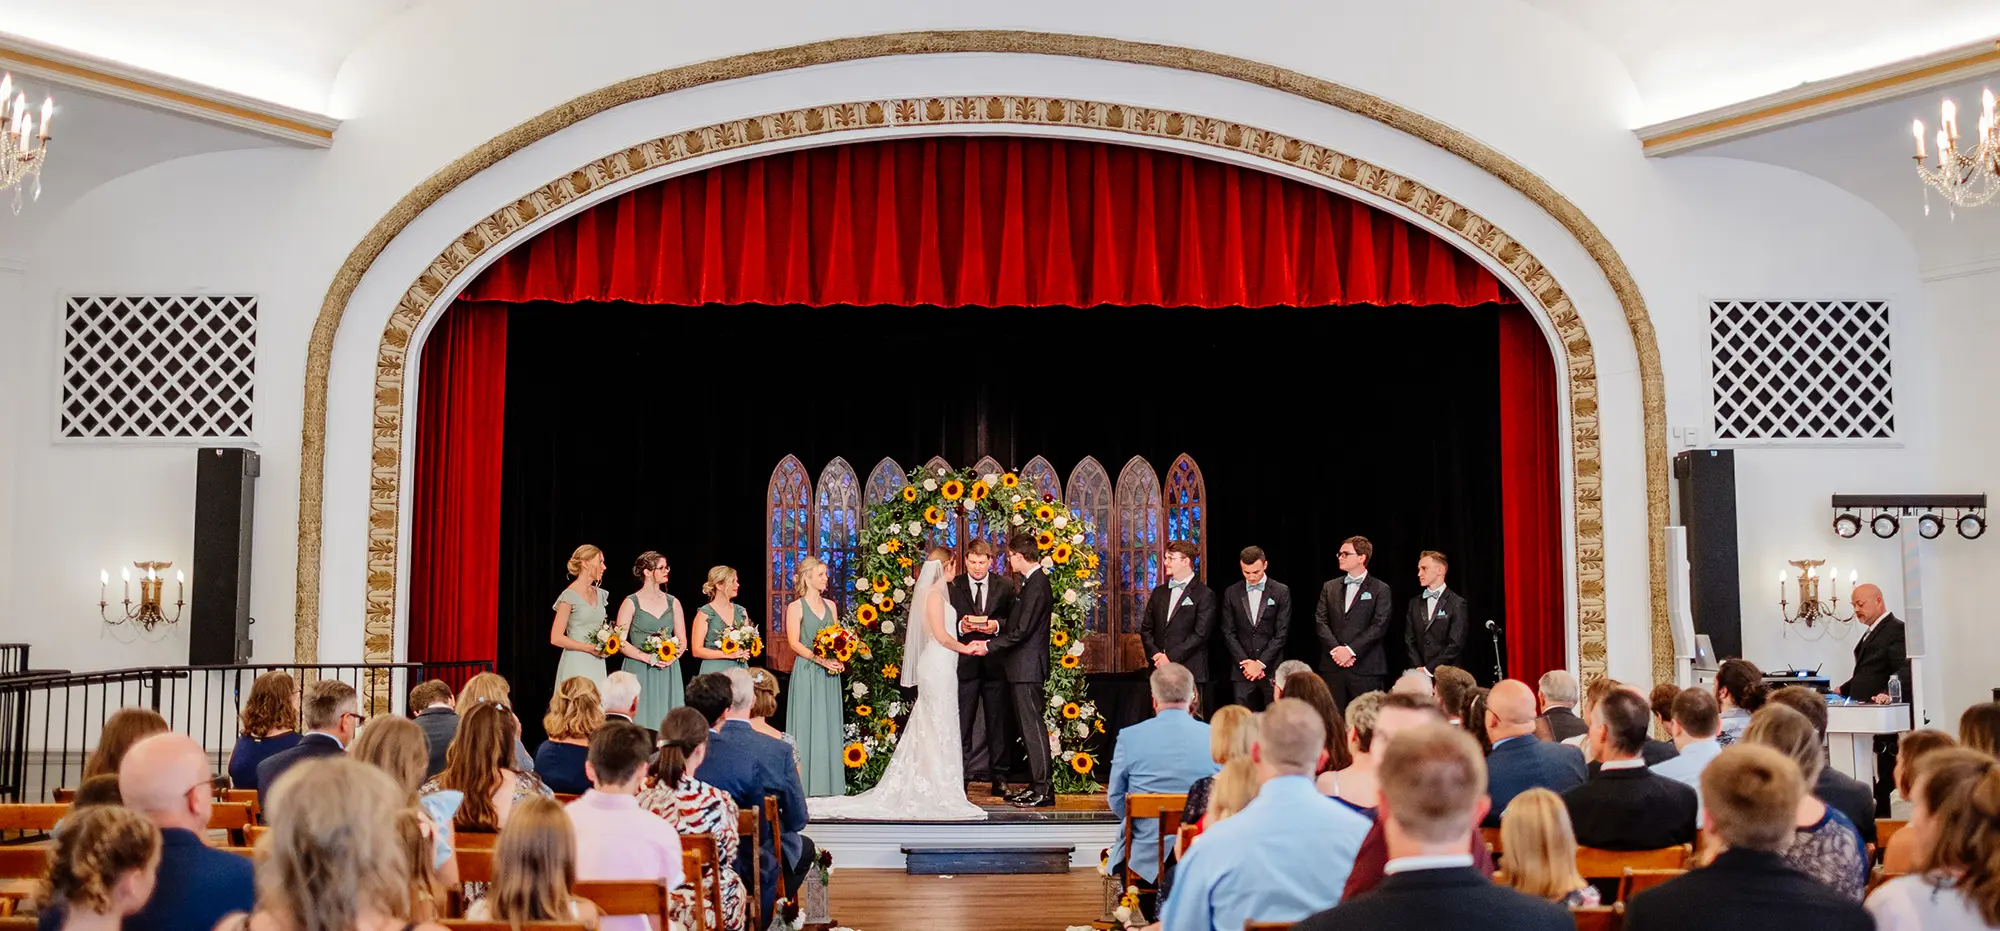 Wedding ceremony in session with the bride and groom on a stage as the audience glances upon them inside The Ladies' Literary Club building